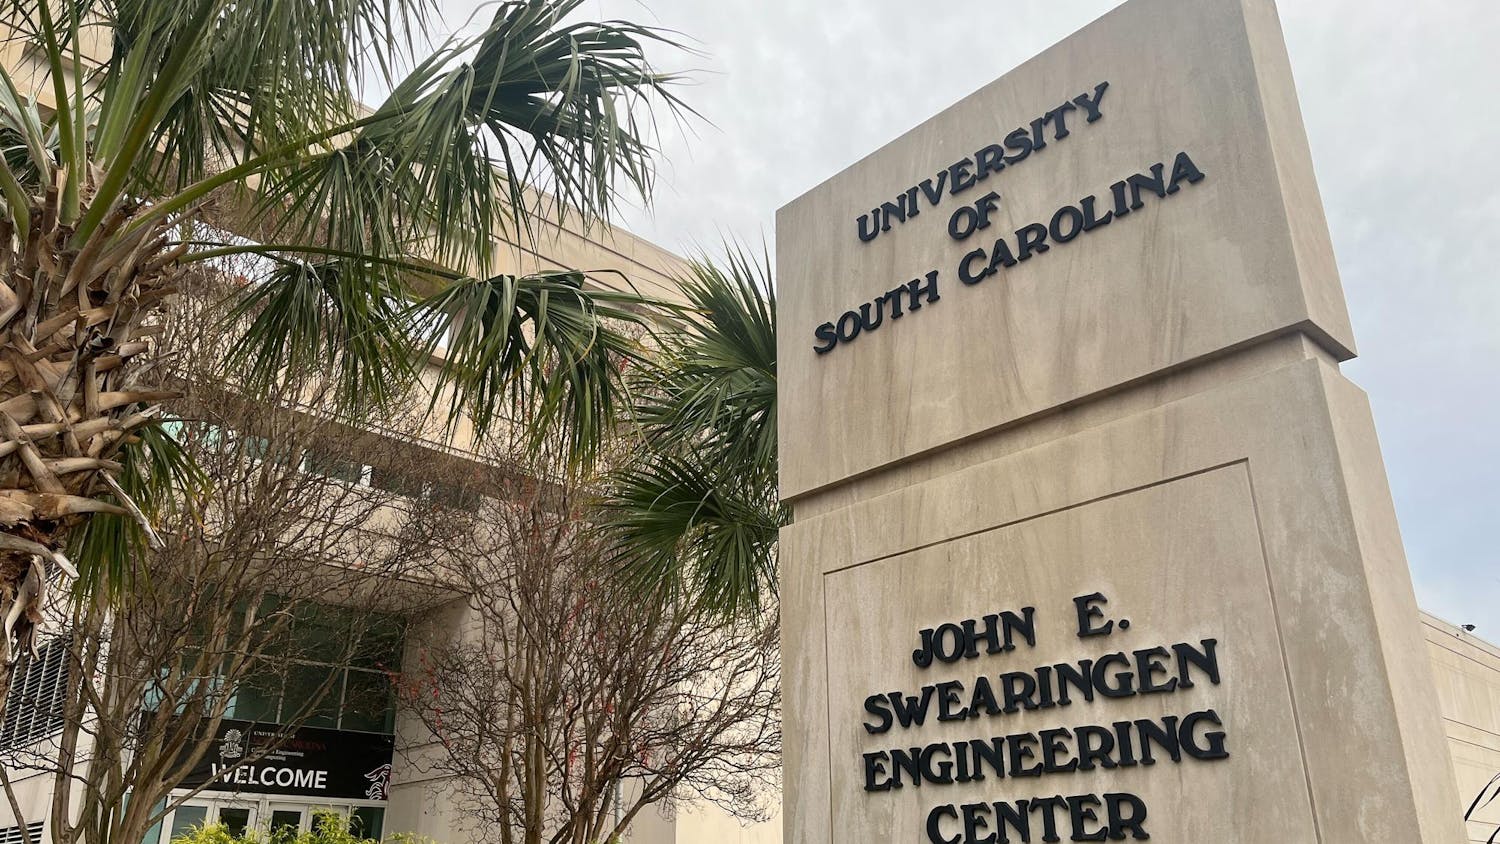 The sign outside of the John E. Swearingen Engineering Center on Dec. 3, 2023. Swearingen houses the makerspace at the University of South Carolina.